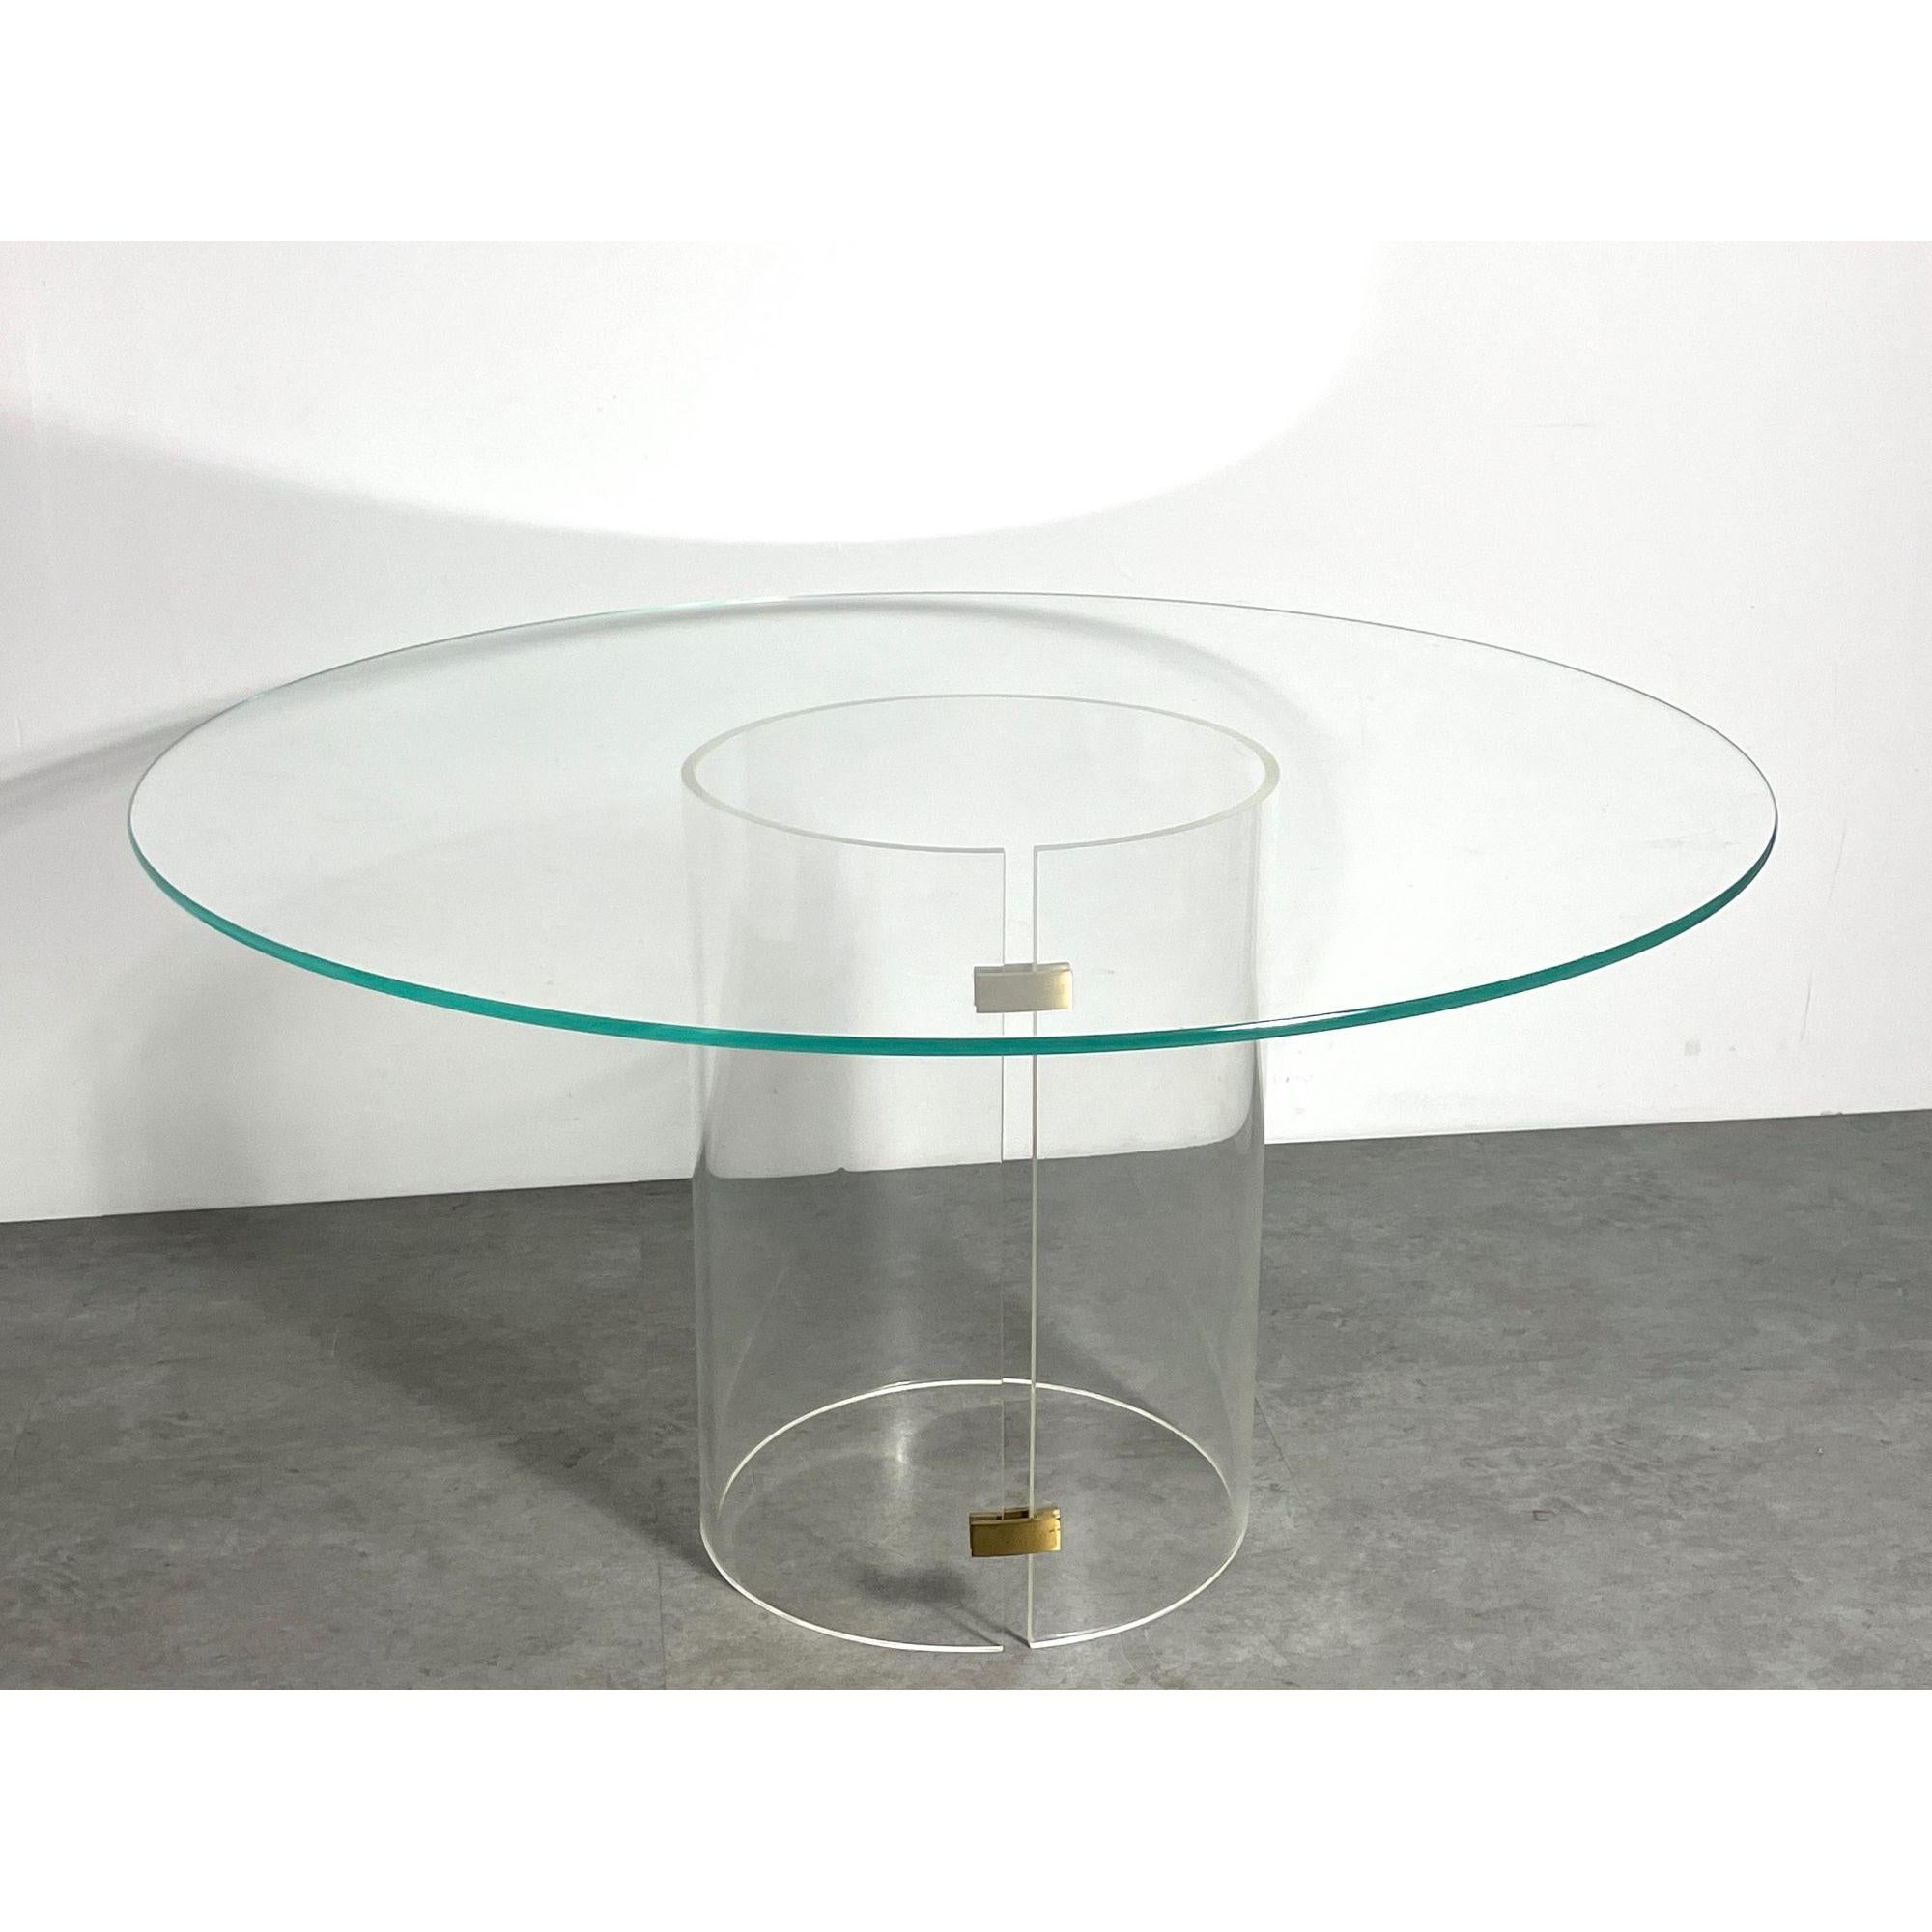 20th Century Vintage Round Pedestal Dining Table in Lucite Brass and Glass circa 1970s For Sale